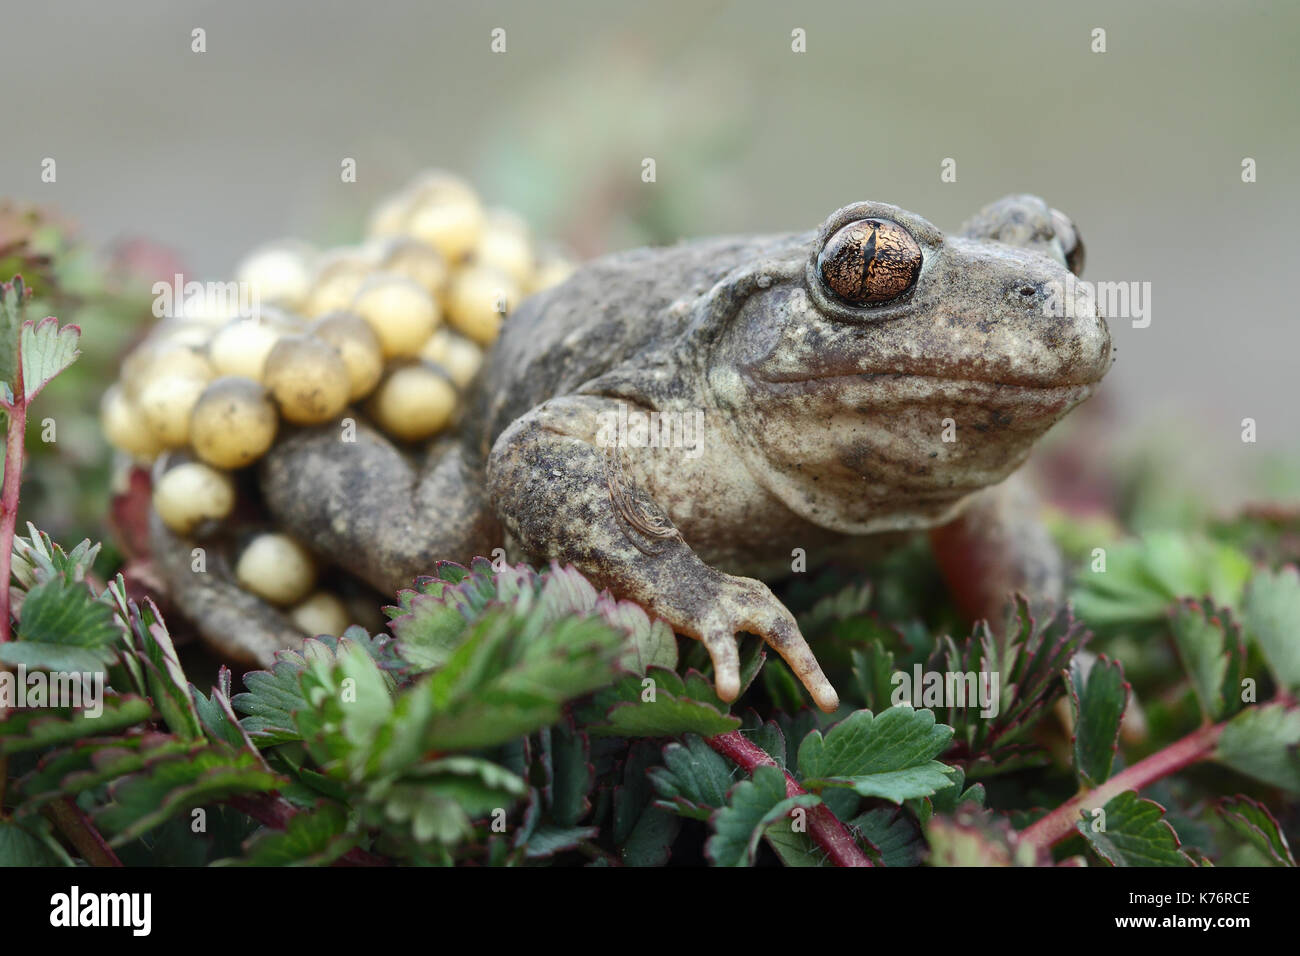 Midwife toad (Alytes obstetricans) Stock Photo